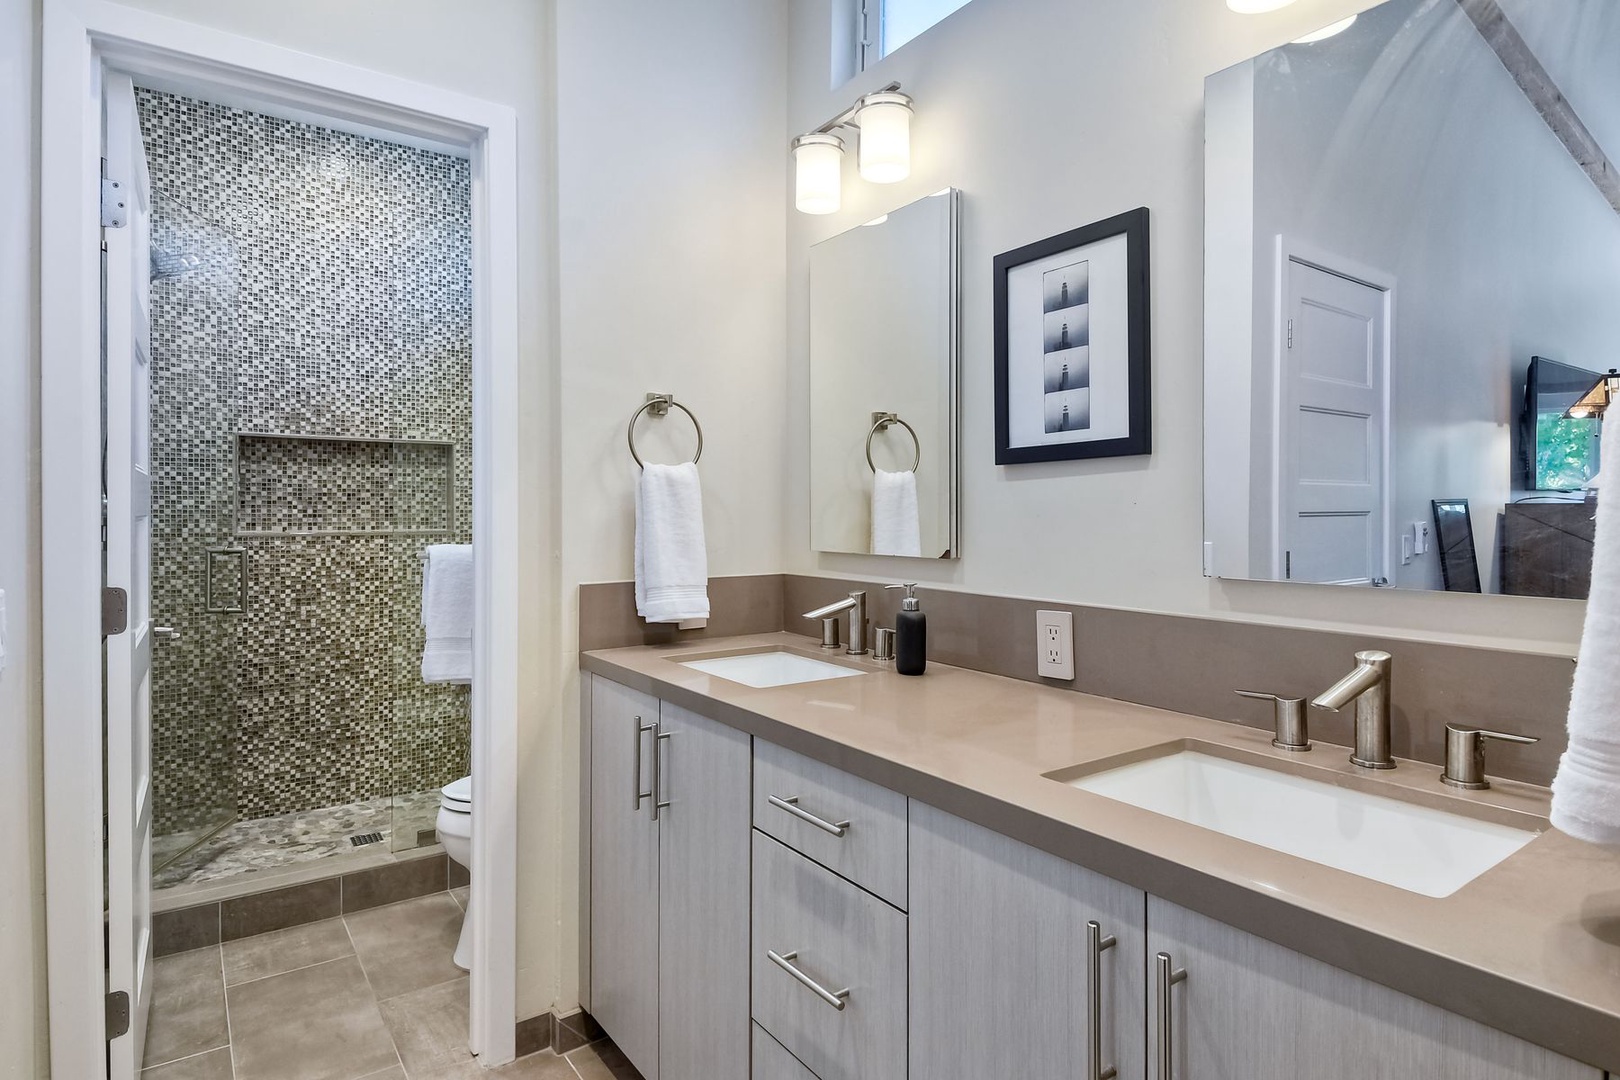 The king ensuite offers a double vanity & glass shower